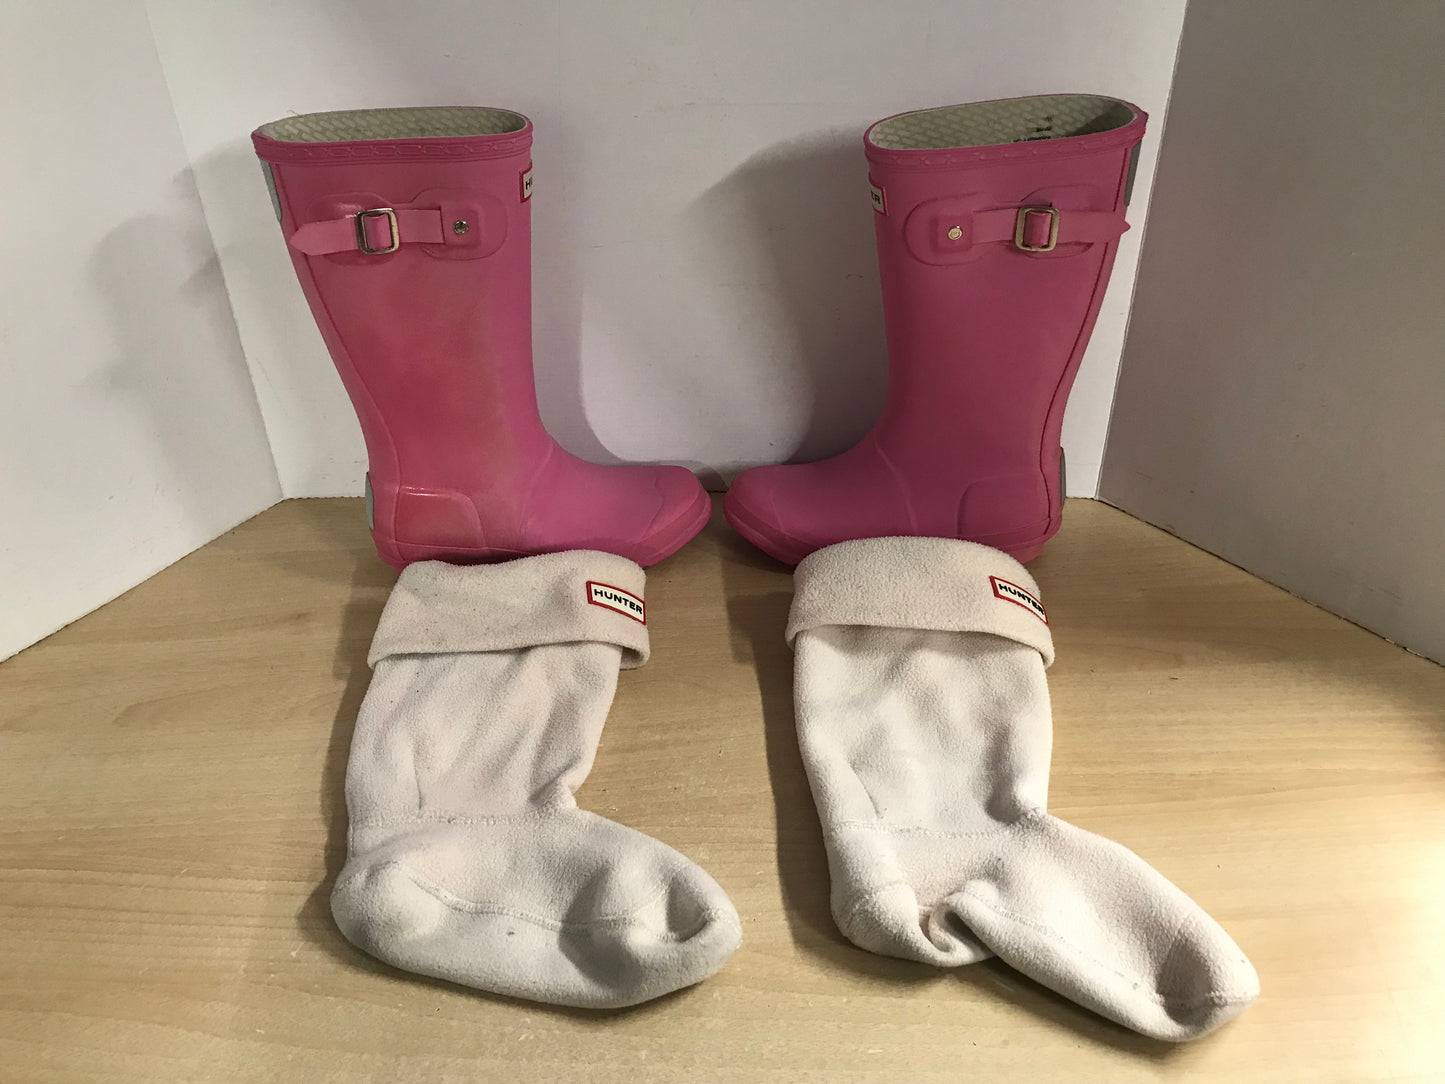 Hunter Rain Boots Child Size 3-4 Pink With Hunter Liner Some Color Wear